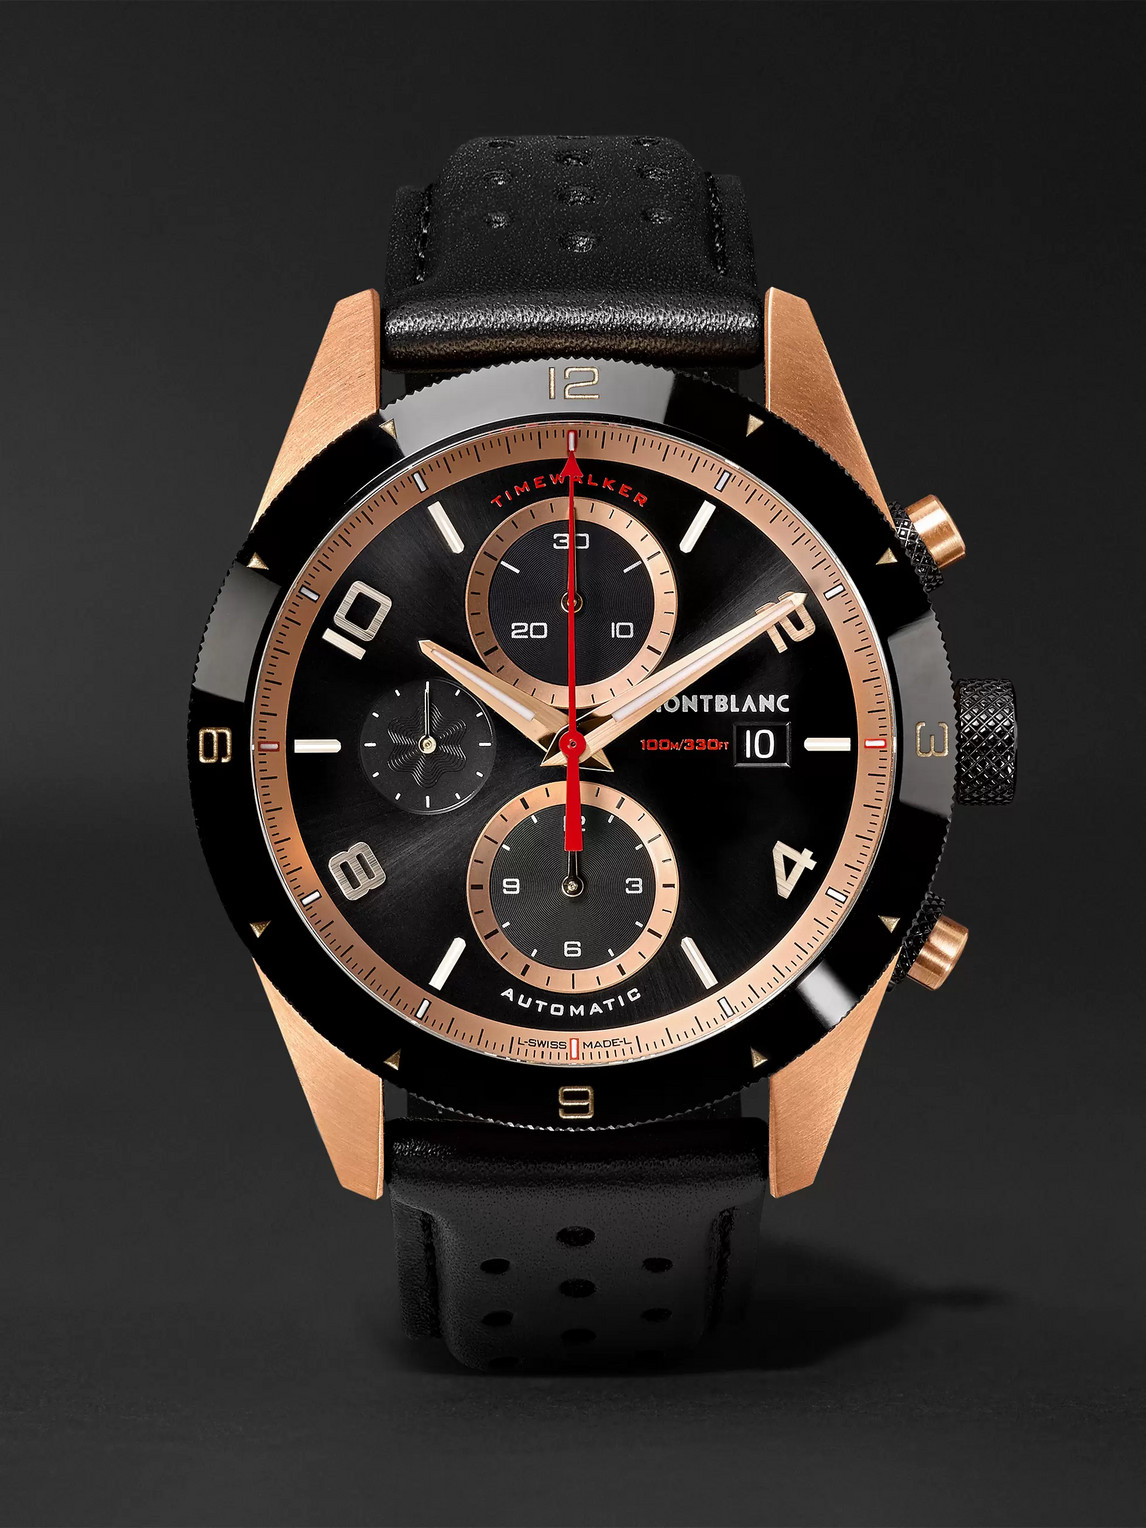 Montblanc Timewalker Automatic Chronograph 43mm 18-karat Red Gold, Ceramic And Leather Watch, Ref. No. 117051 In Black